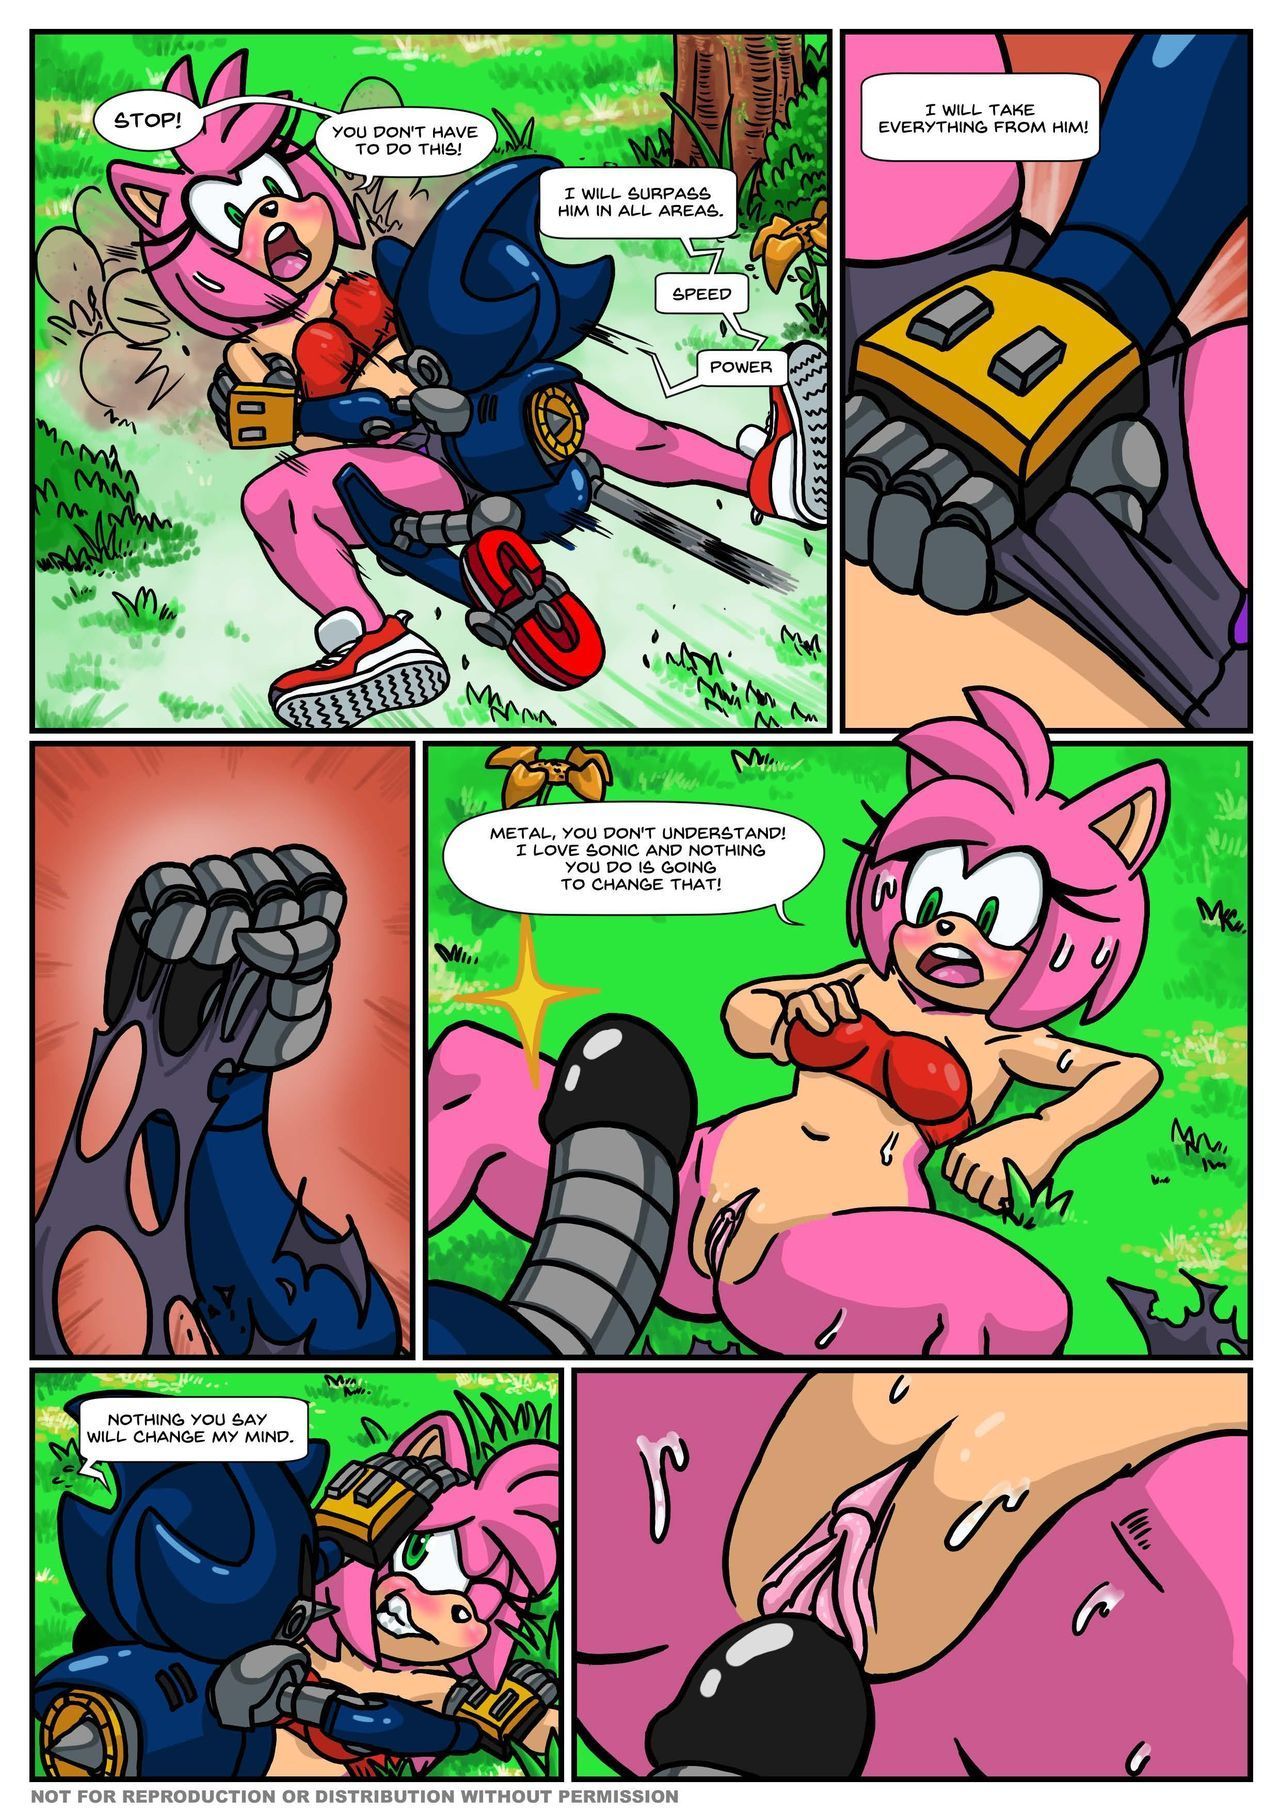 Sonic the hedgehog have sex